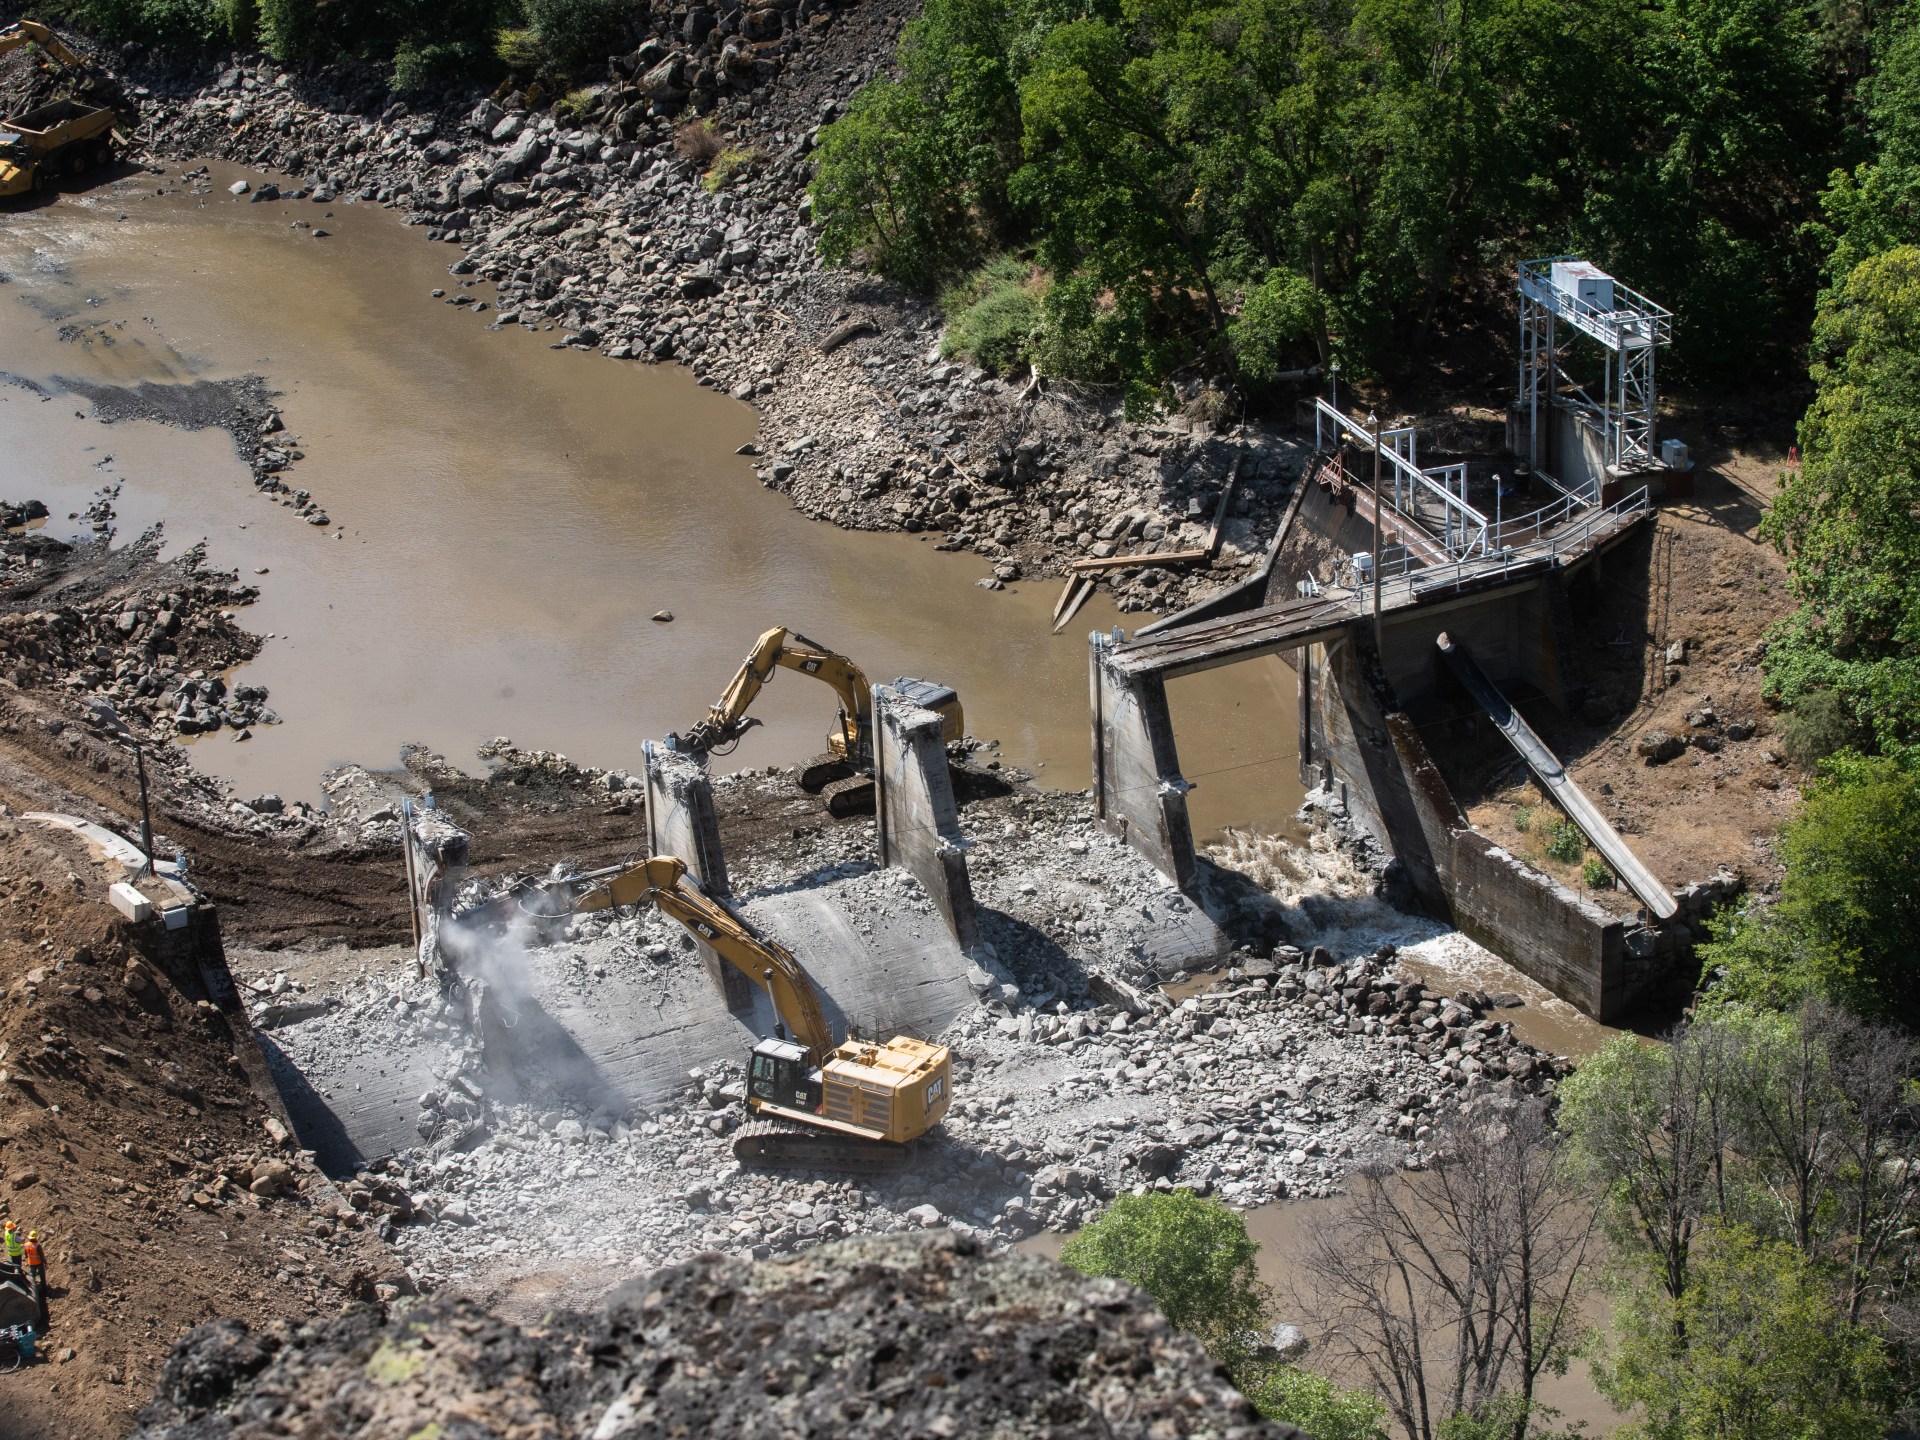 Indigenous advocacy leads to largest dam removal project in US history | Indigenous Rights News #Indigenous #advocacy #leads #largest #dam #removal #project #history #Indigenous #Rights #News